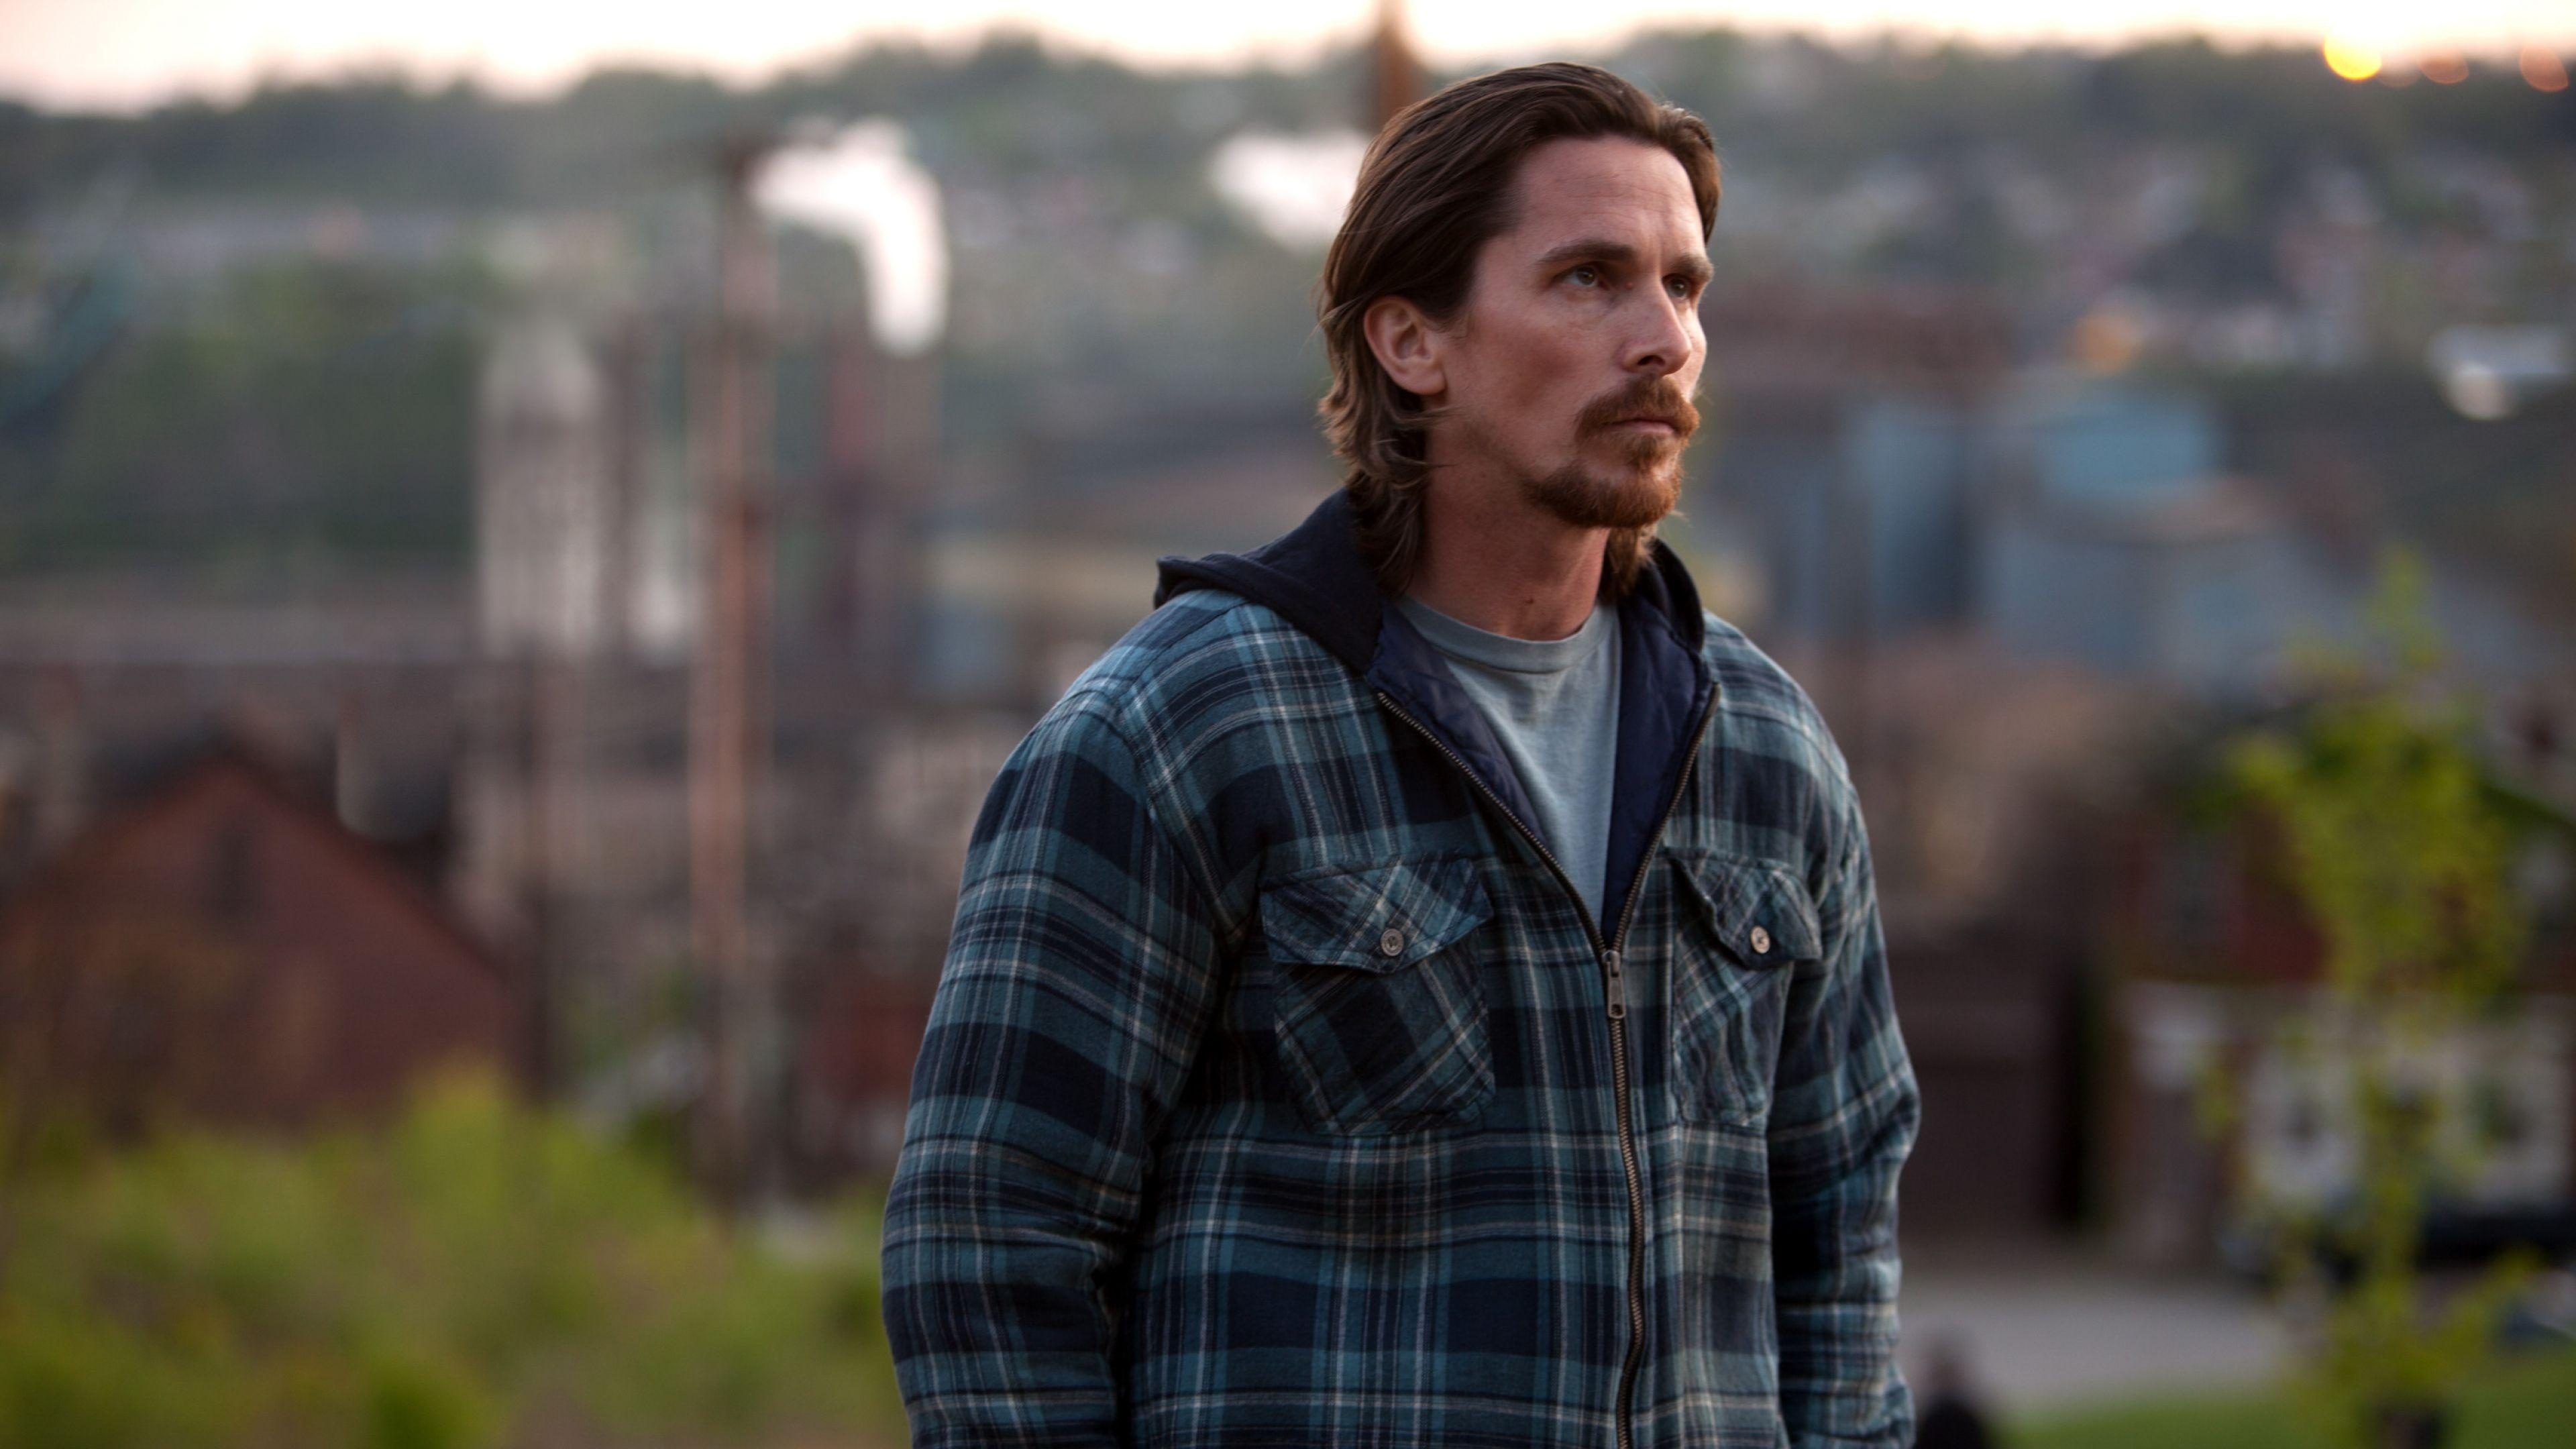 Christian Bale: Out of the Furnace, Russell Baze. 3840x2160 4K Background.